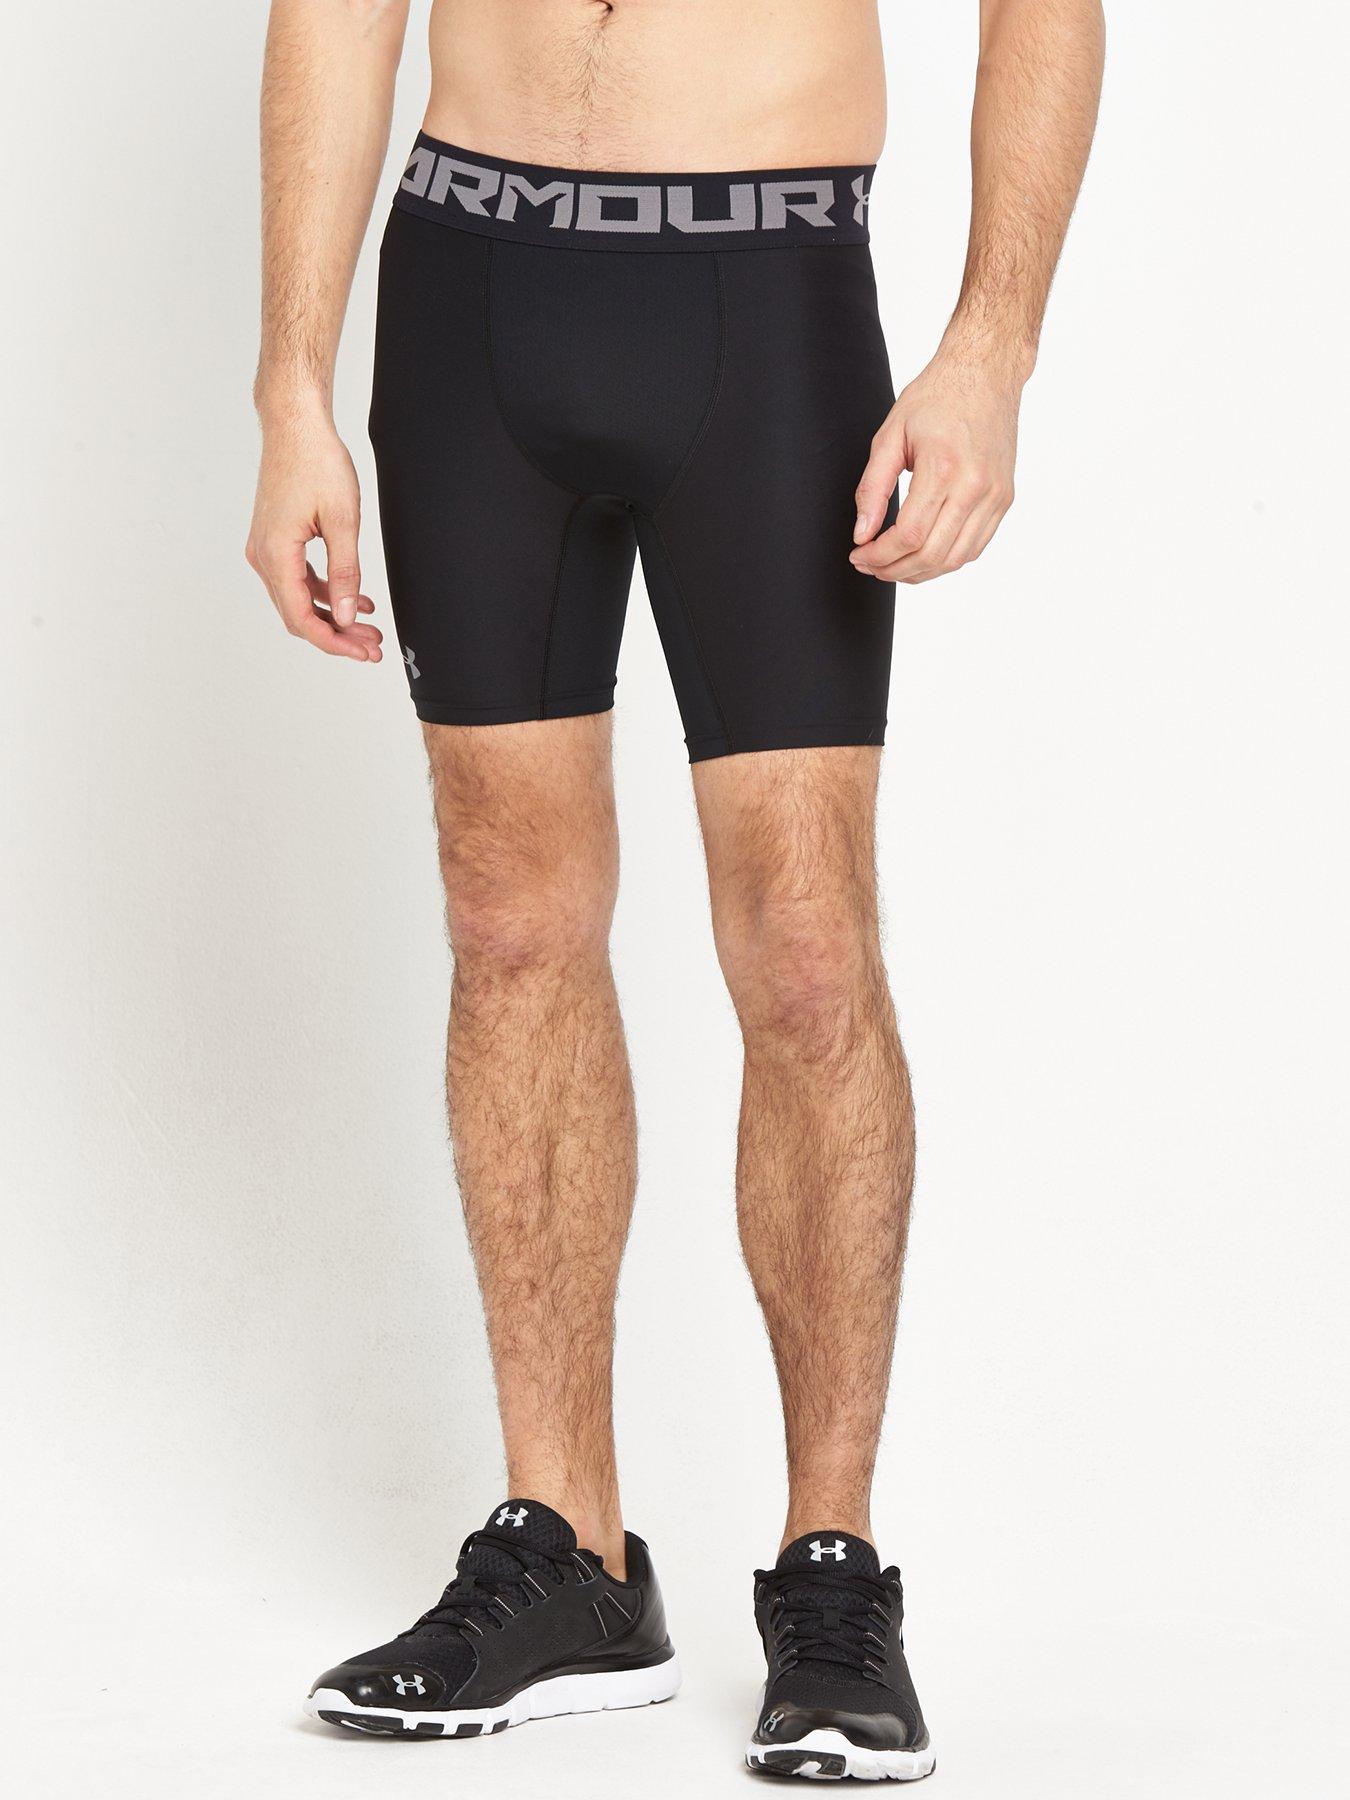 under armour base layer shorts